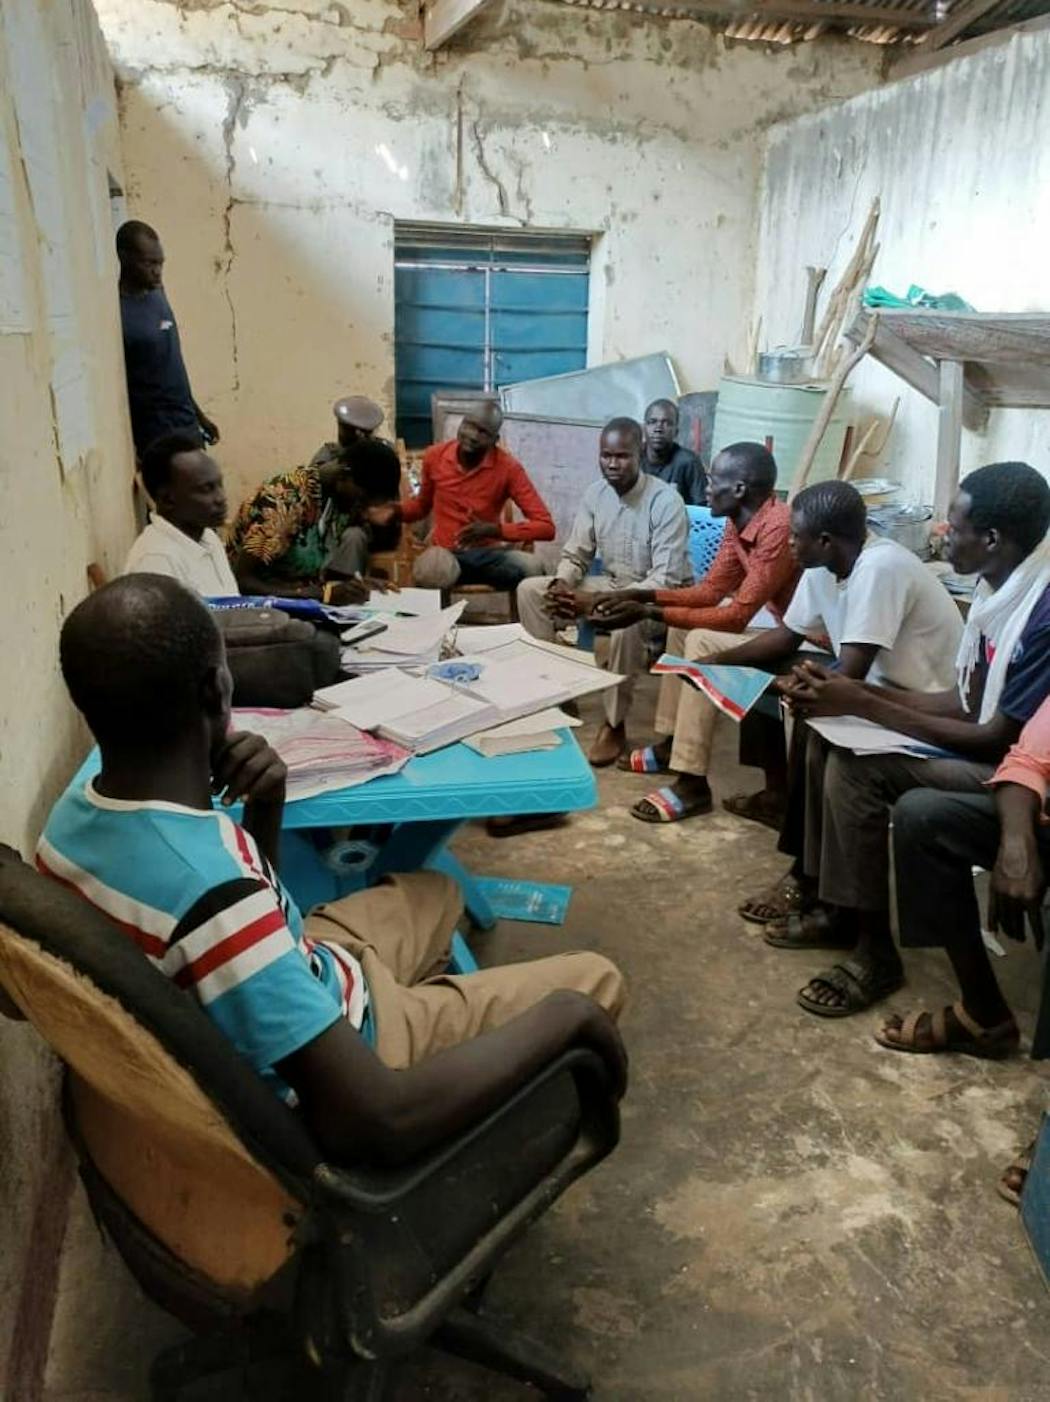 College students in Juba, South Sudan, engaged in a study session.